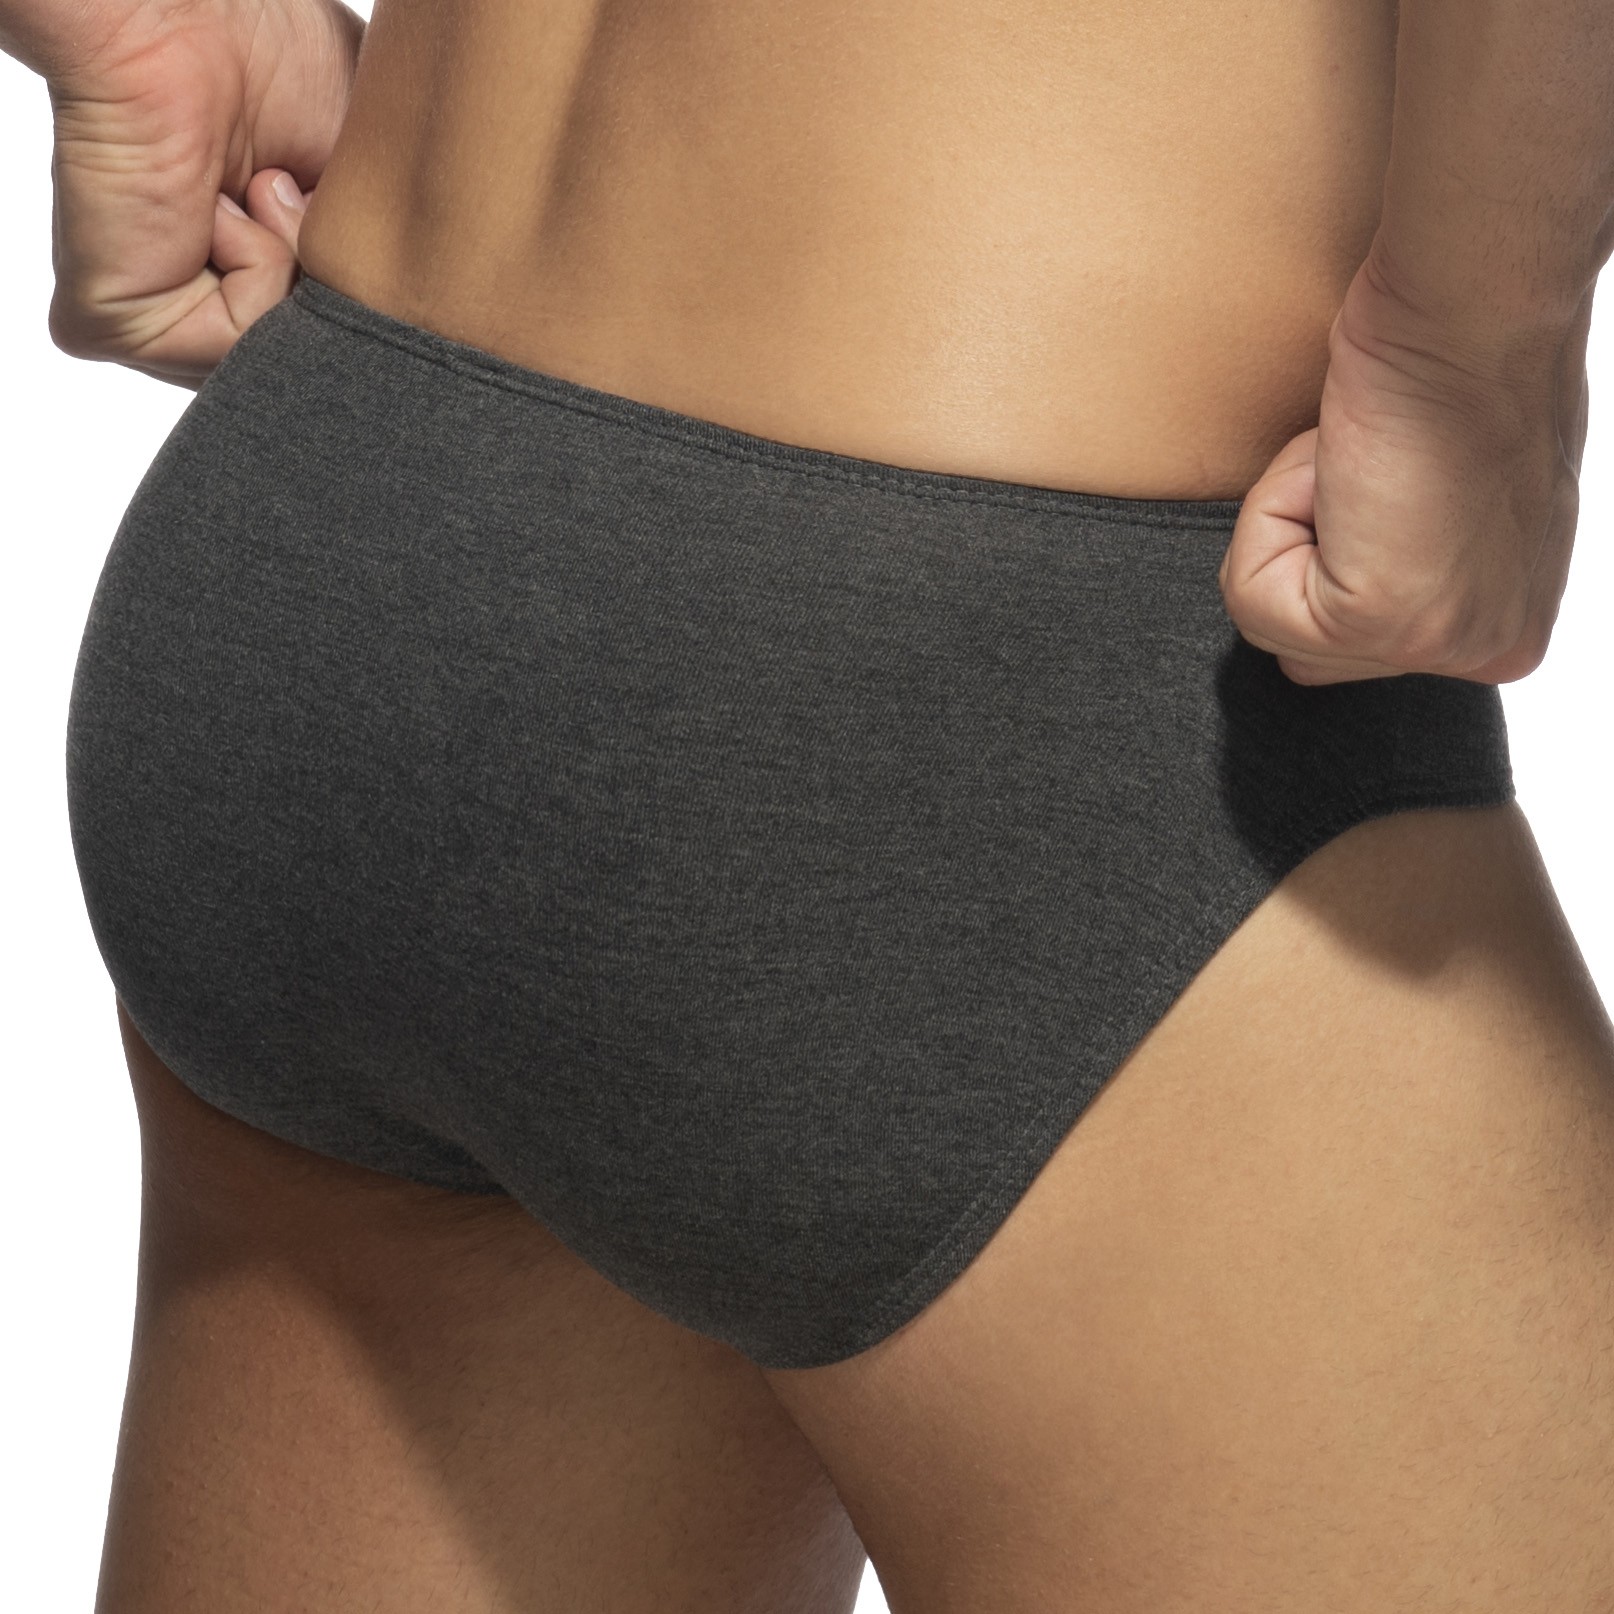 Bikini Cotton - charcoal: Briefs for man brand ADDICTED for sale on